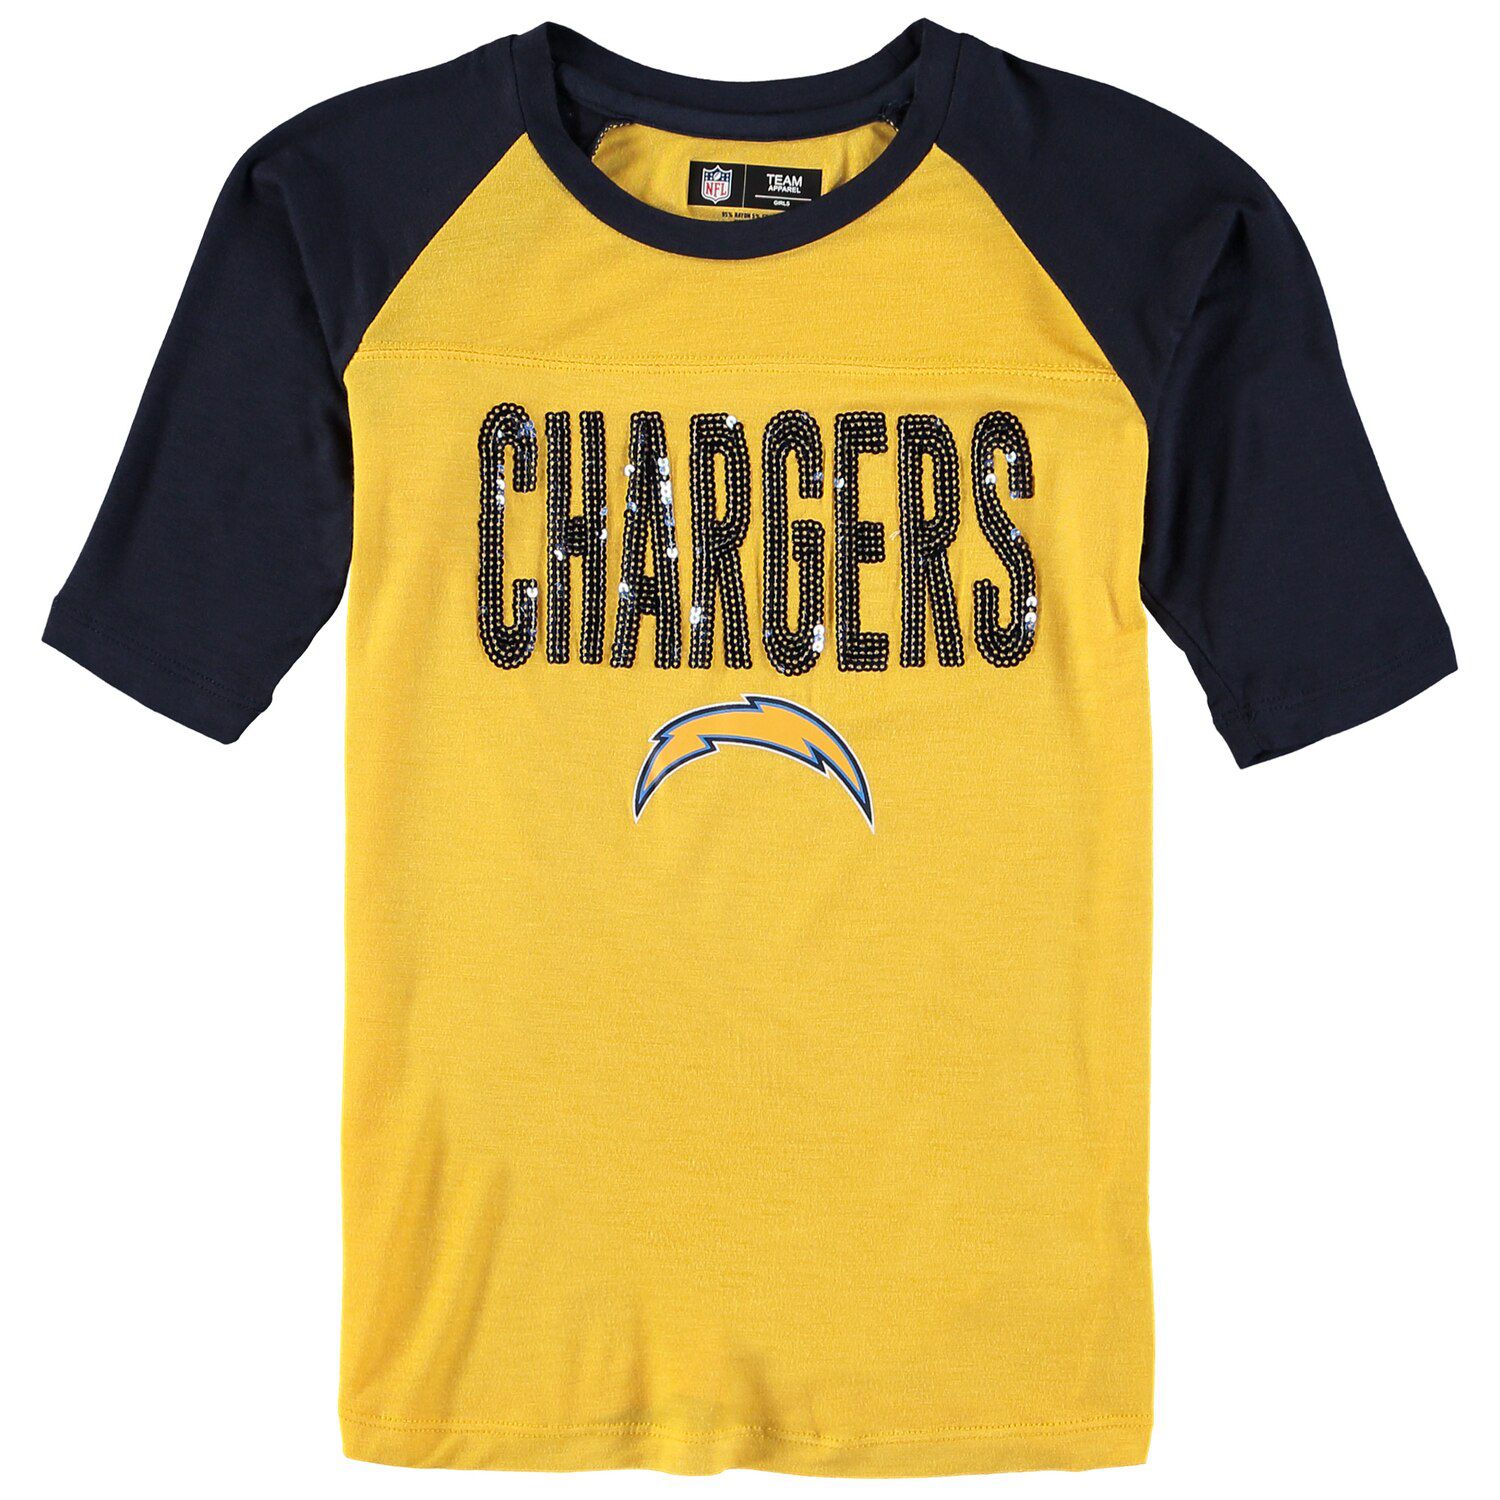 girls chargers shirt